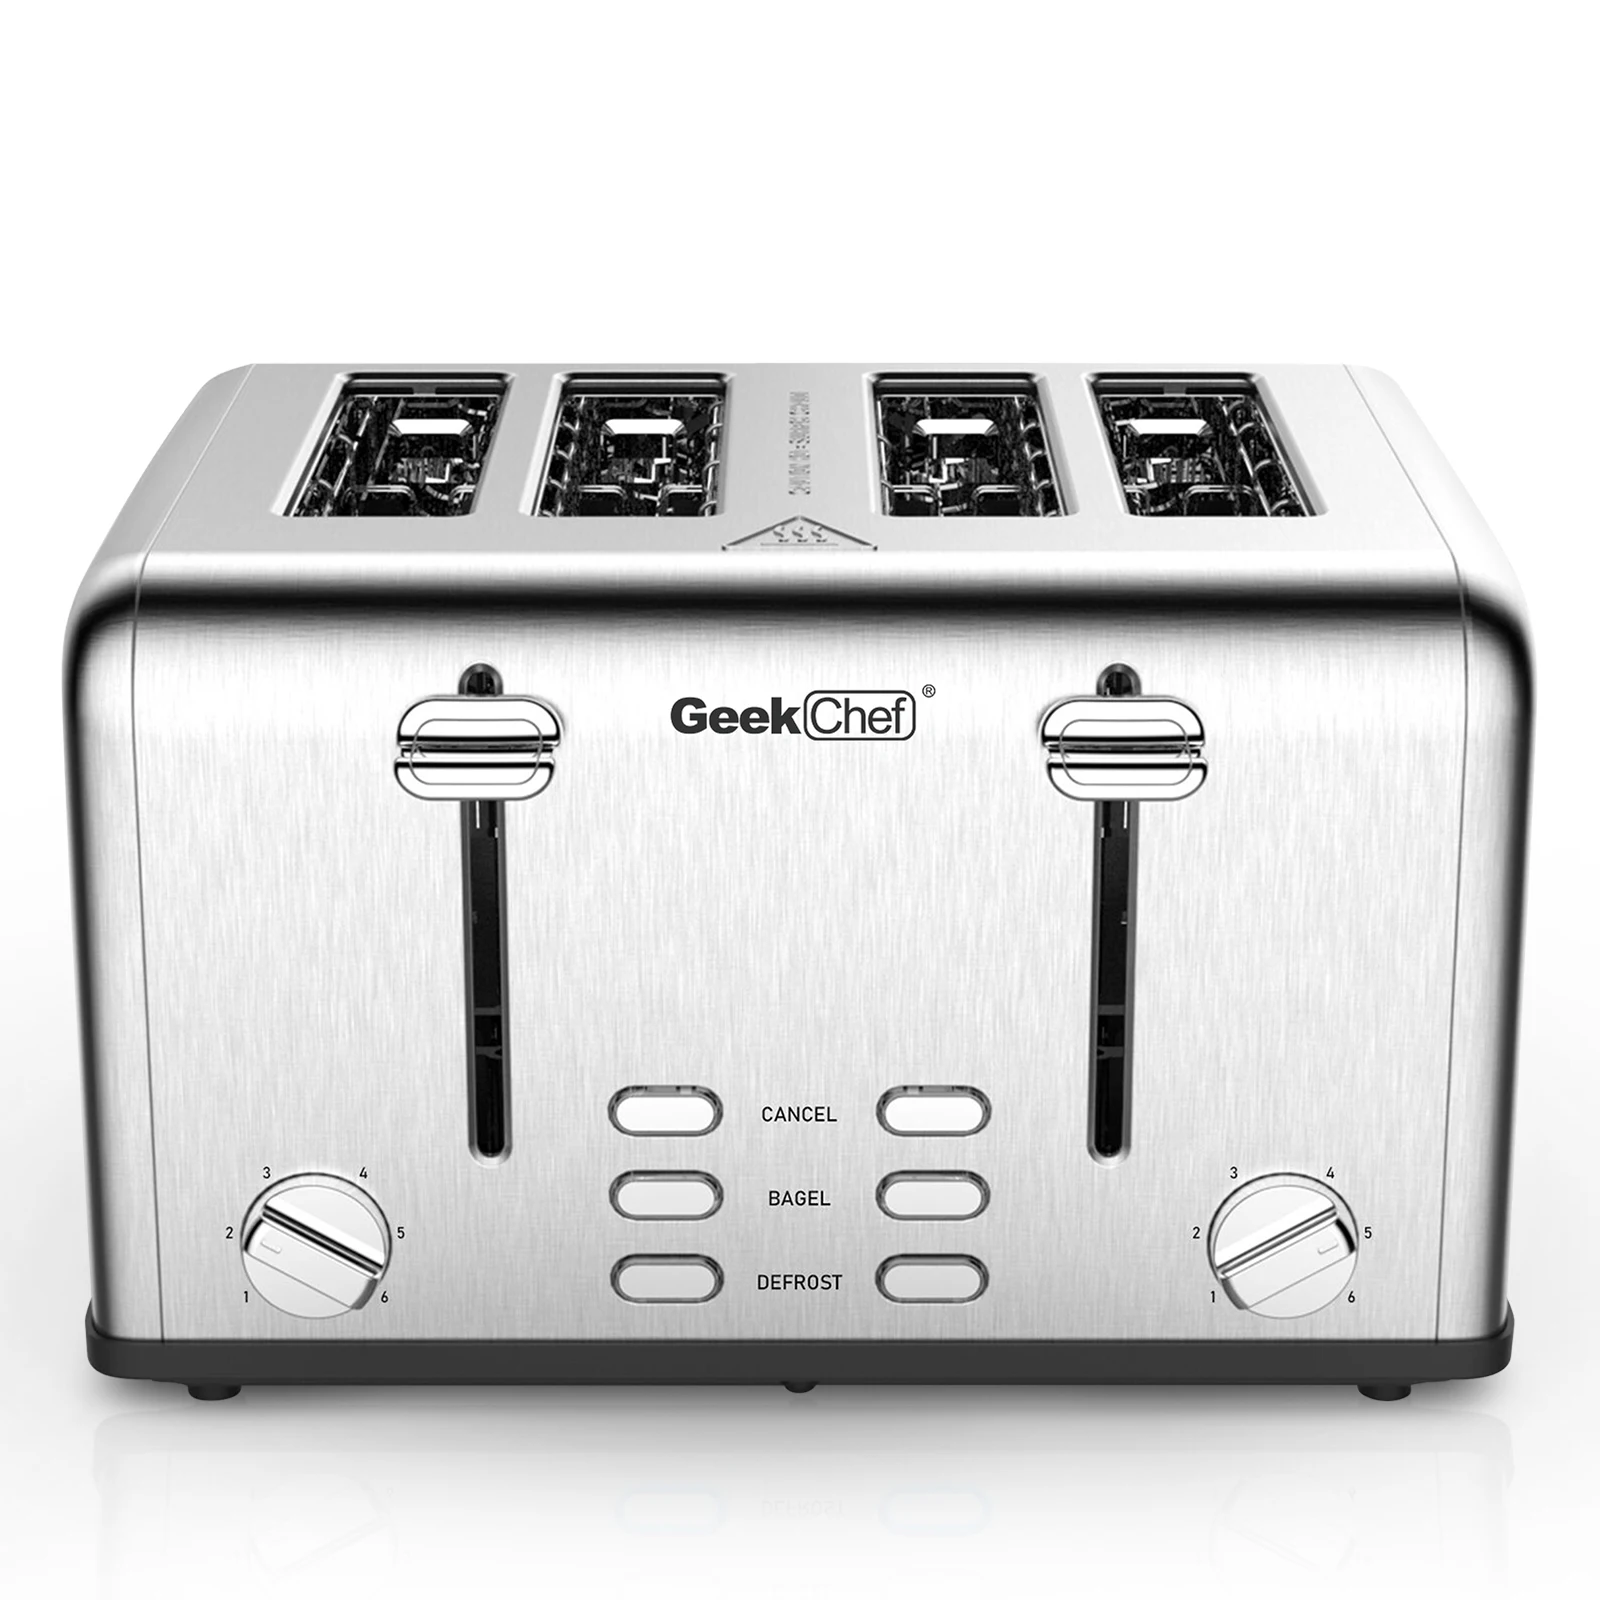 

Toaster 4 Slice Stainless Steel Extra-Wide Slot Toaster with Dual Control Panels of Bagel/Defrost/Cancel Function